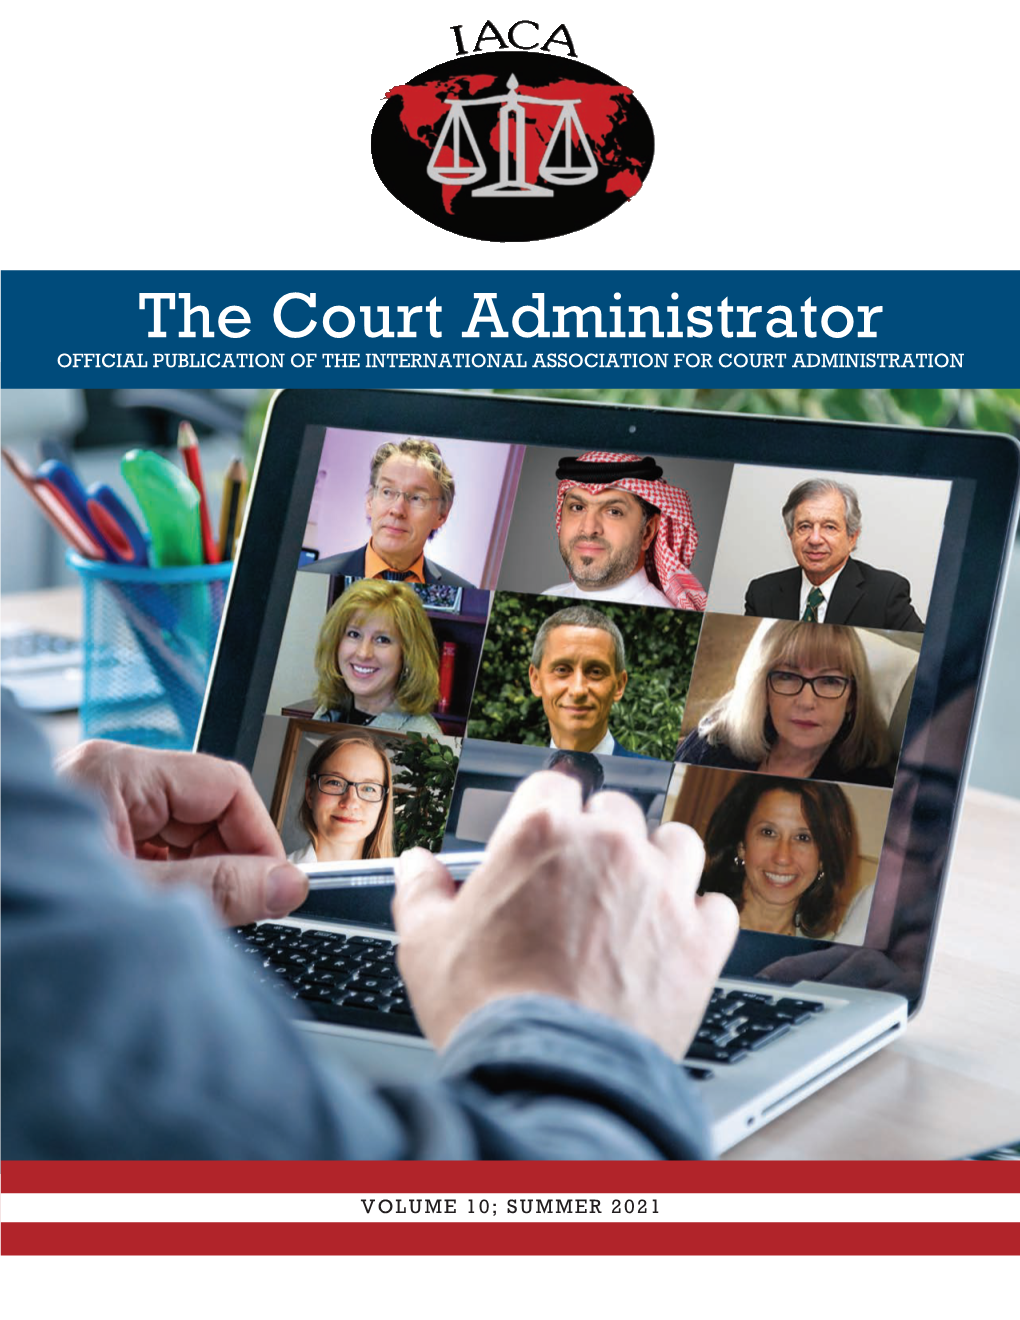 The Court Administrator OFFICIAL PUBLICATION of the INTERNATIONAL ASSOCIATION for COURT ADMINISTRATION